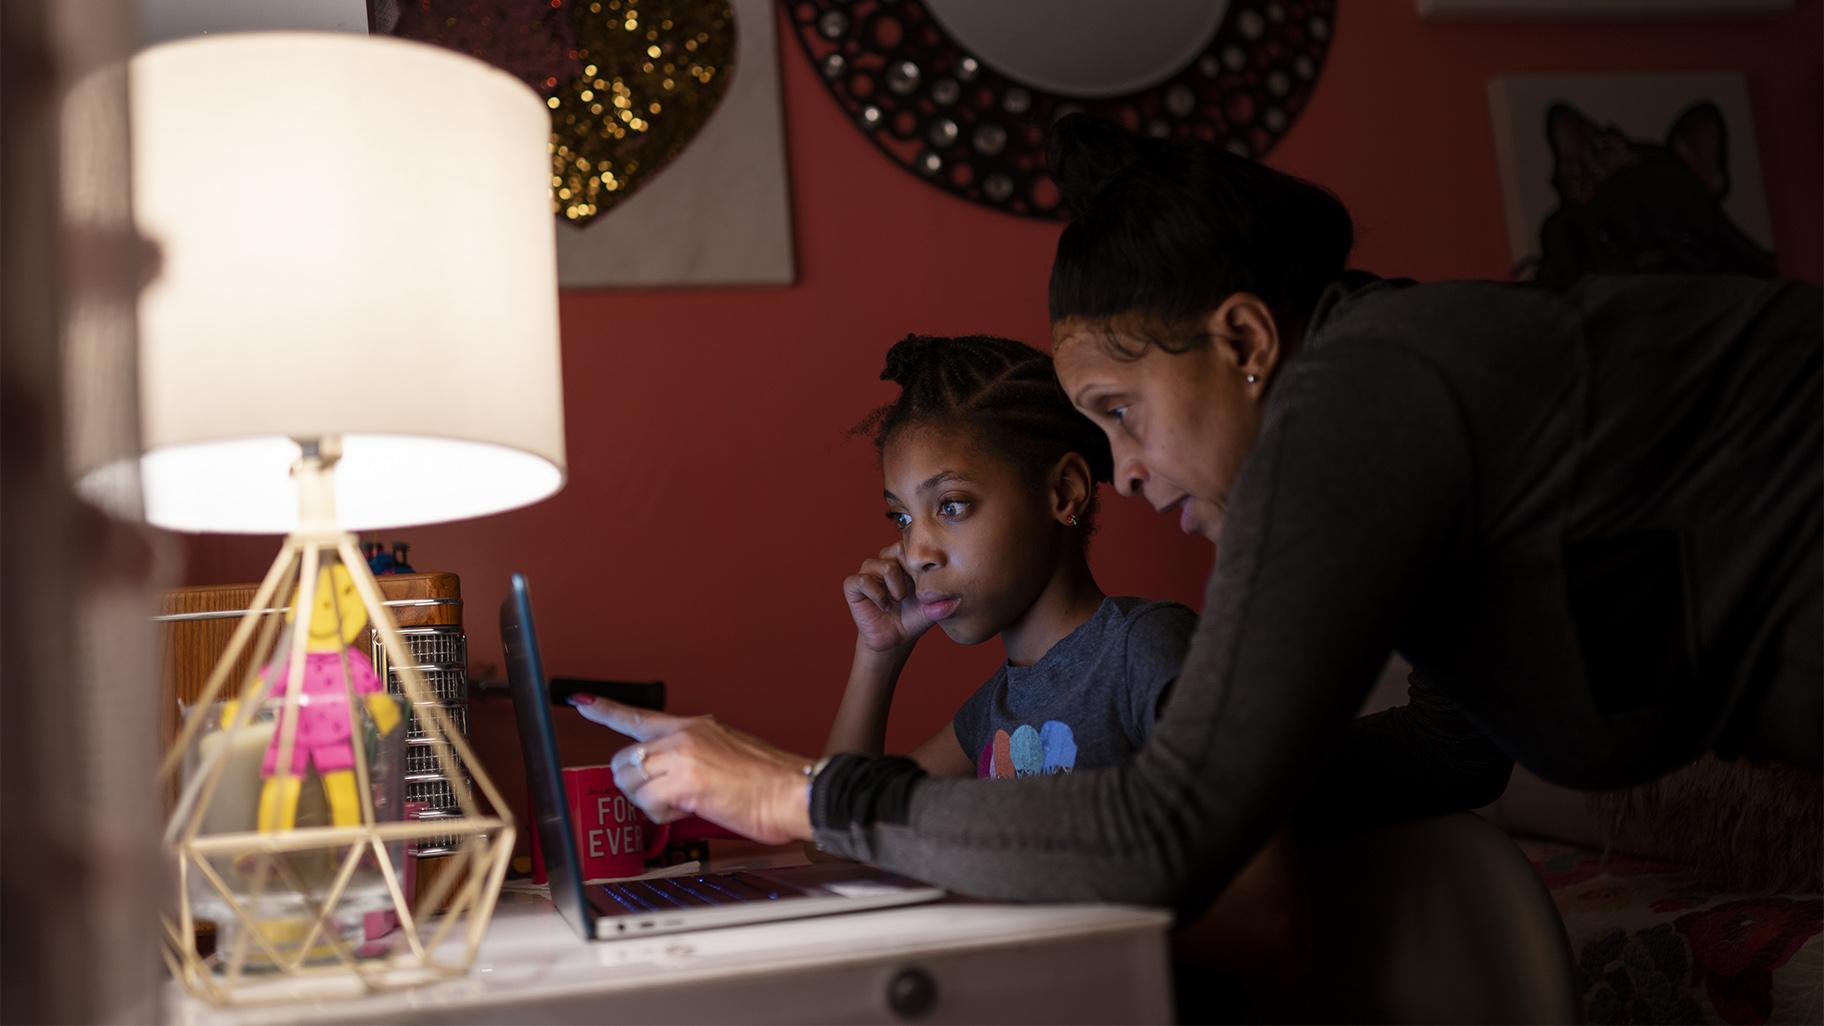 Abigail Schneider, 8, center, completes a level of her learning game with her mother April in her bedroom, Wednesday, Dec. 8, 2021, in the Brooklyn borough of New York. (AP Photo / John Minchillo) 